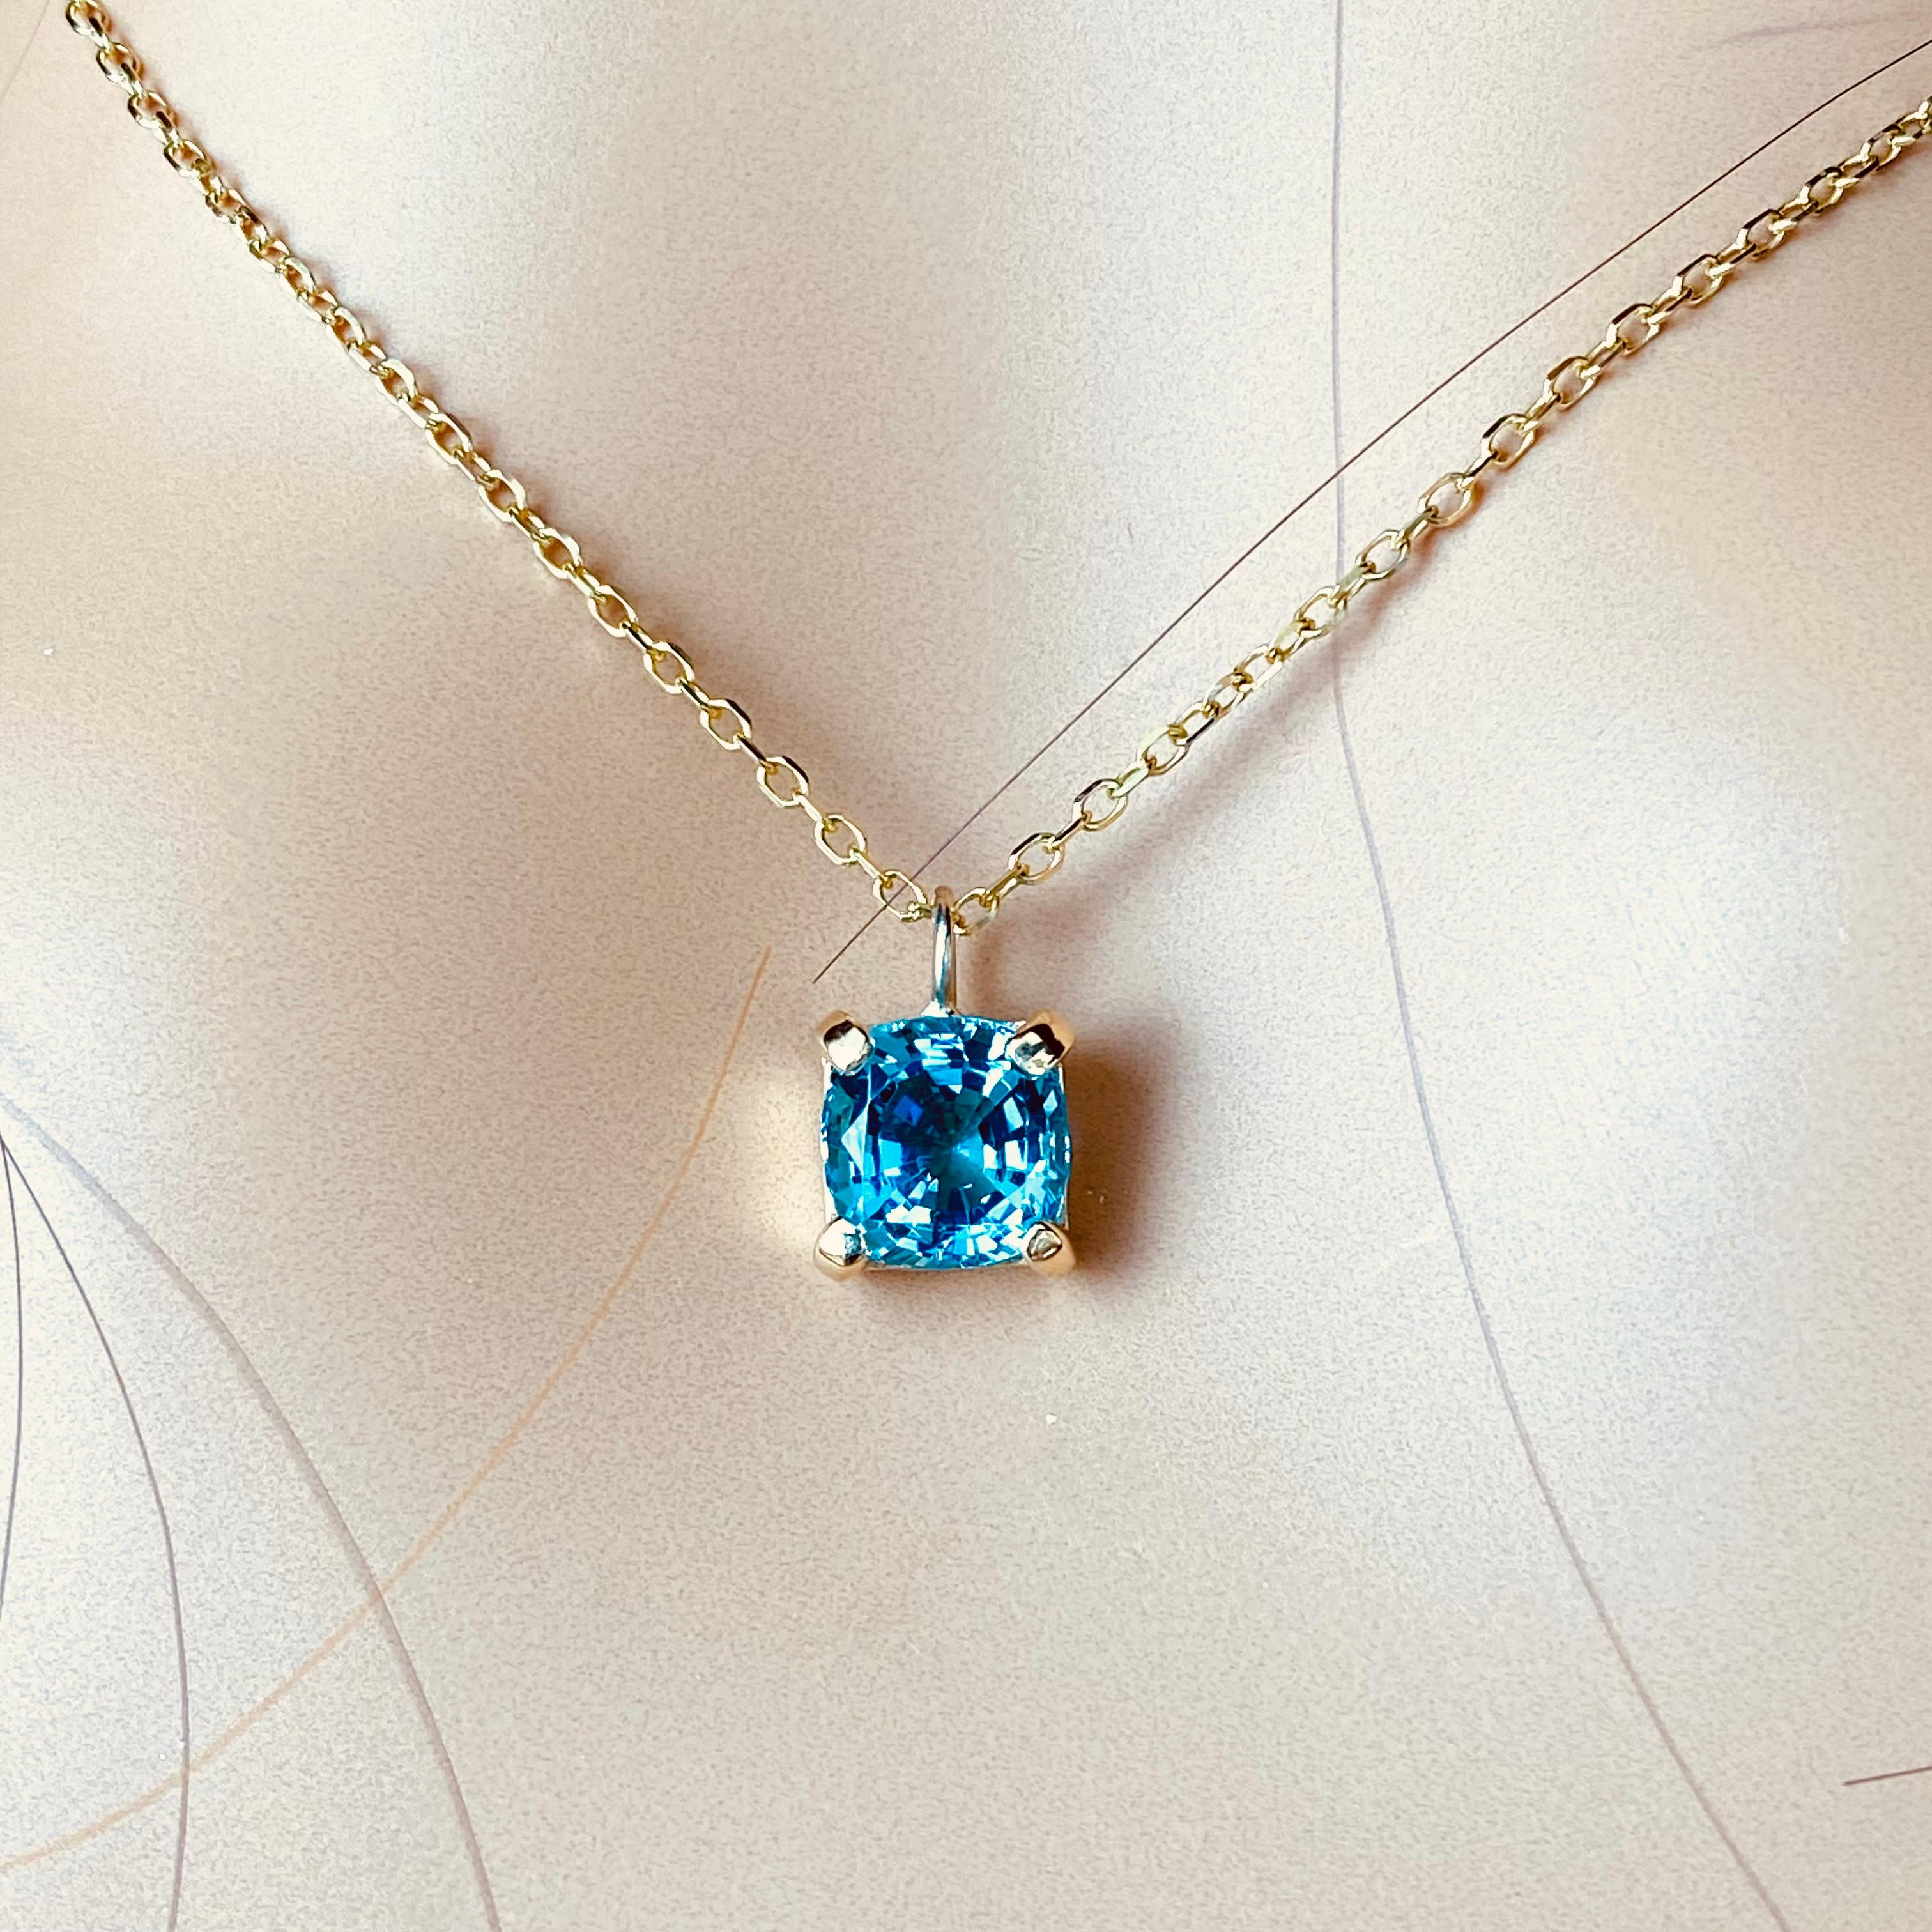 Indulge in sophistication with our exquisite Cushion Shaped Aquamarine Diamond Lariat Pendant. This captivating piece features a dazzling 1.65 carat cushion-cut aquamarine, carefully cradled in a lustrous white gold setting.
Key Features:
Gemstone: